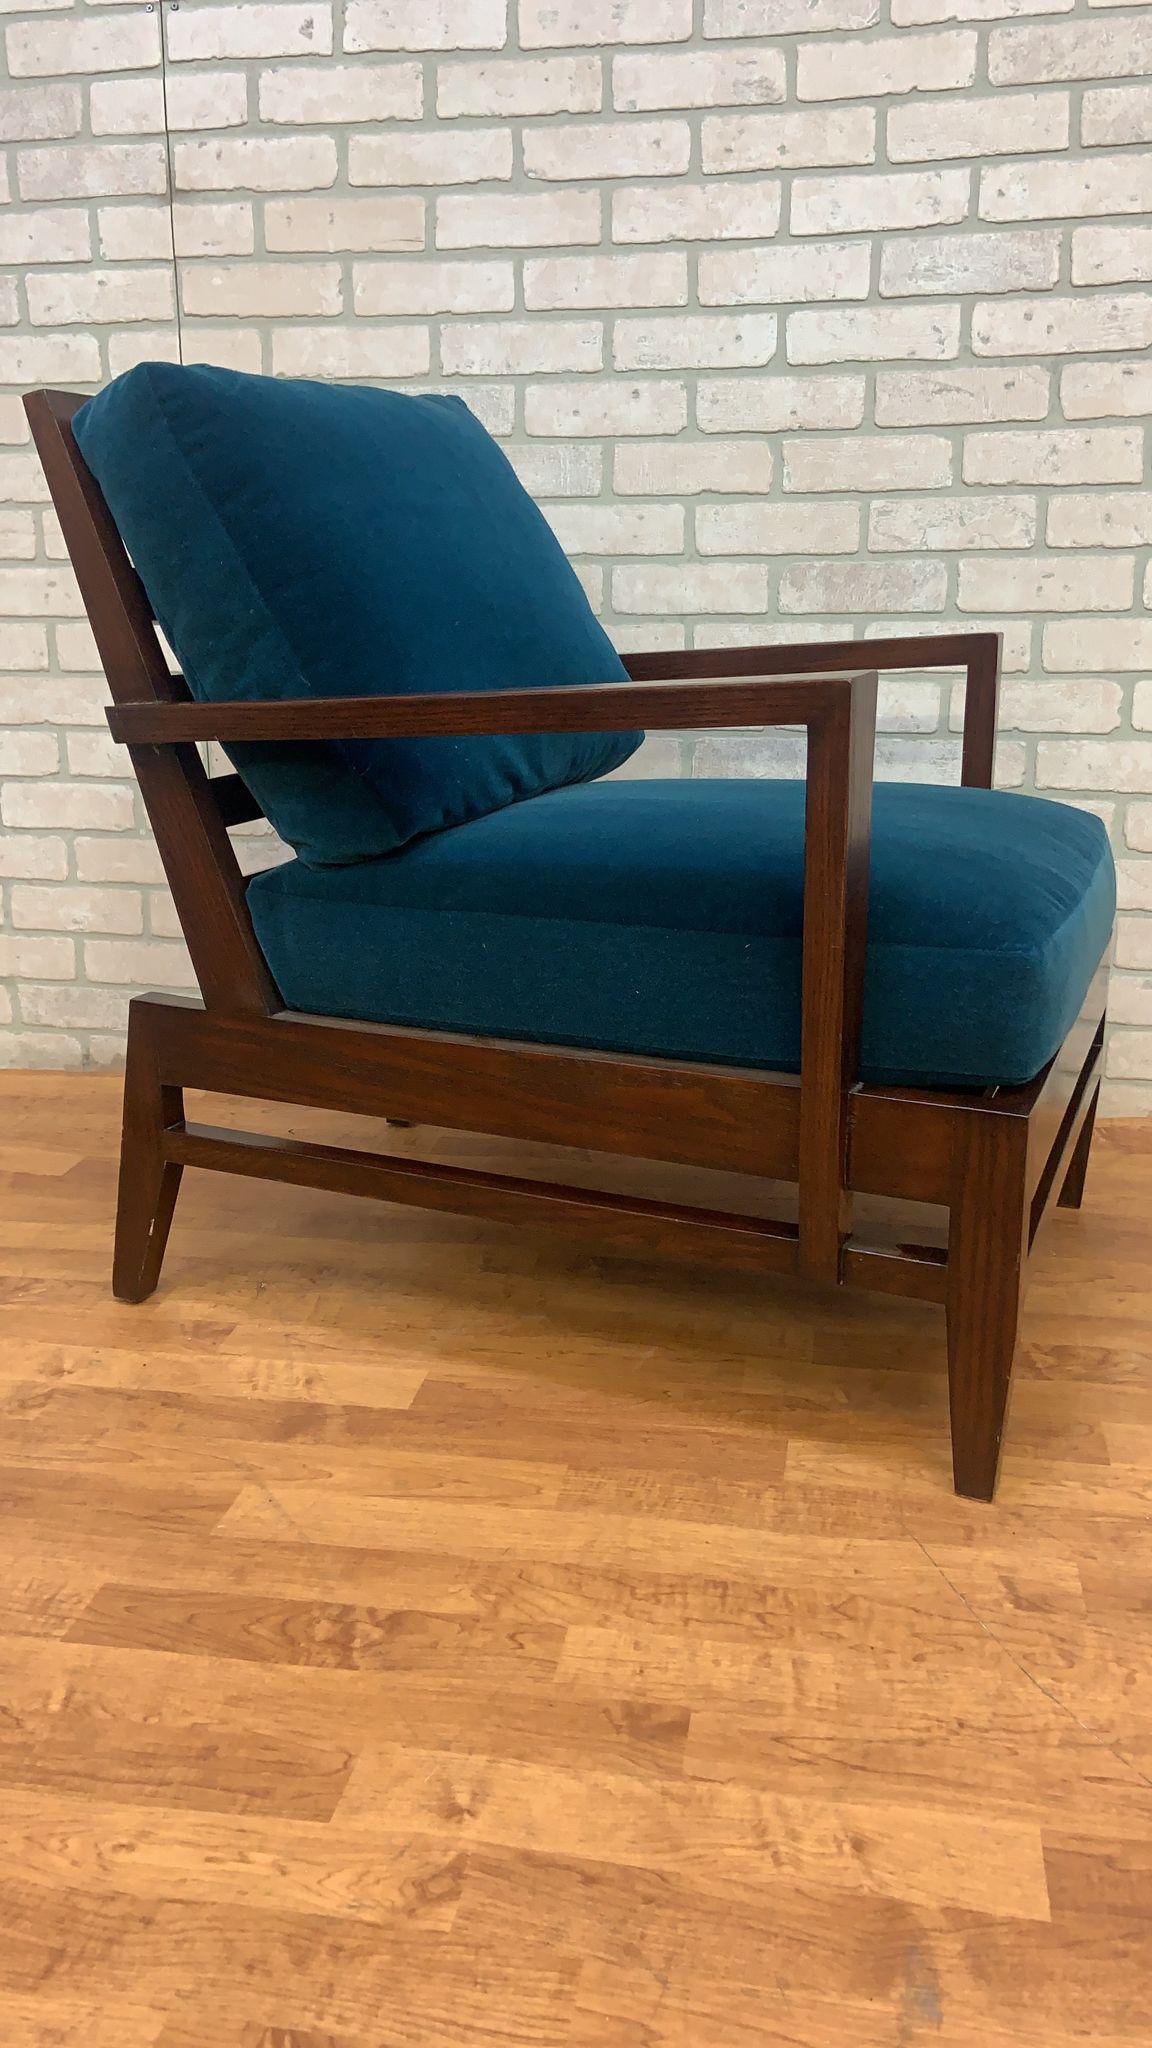 Mid-Century Modern Vintage French René Gabriel Cherry Wood Slat Back Lounge Chair in Teal Mohair For Sale